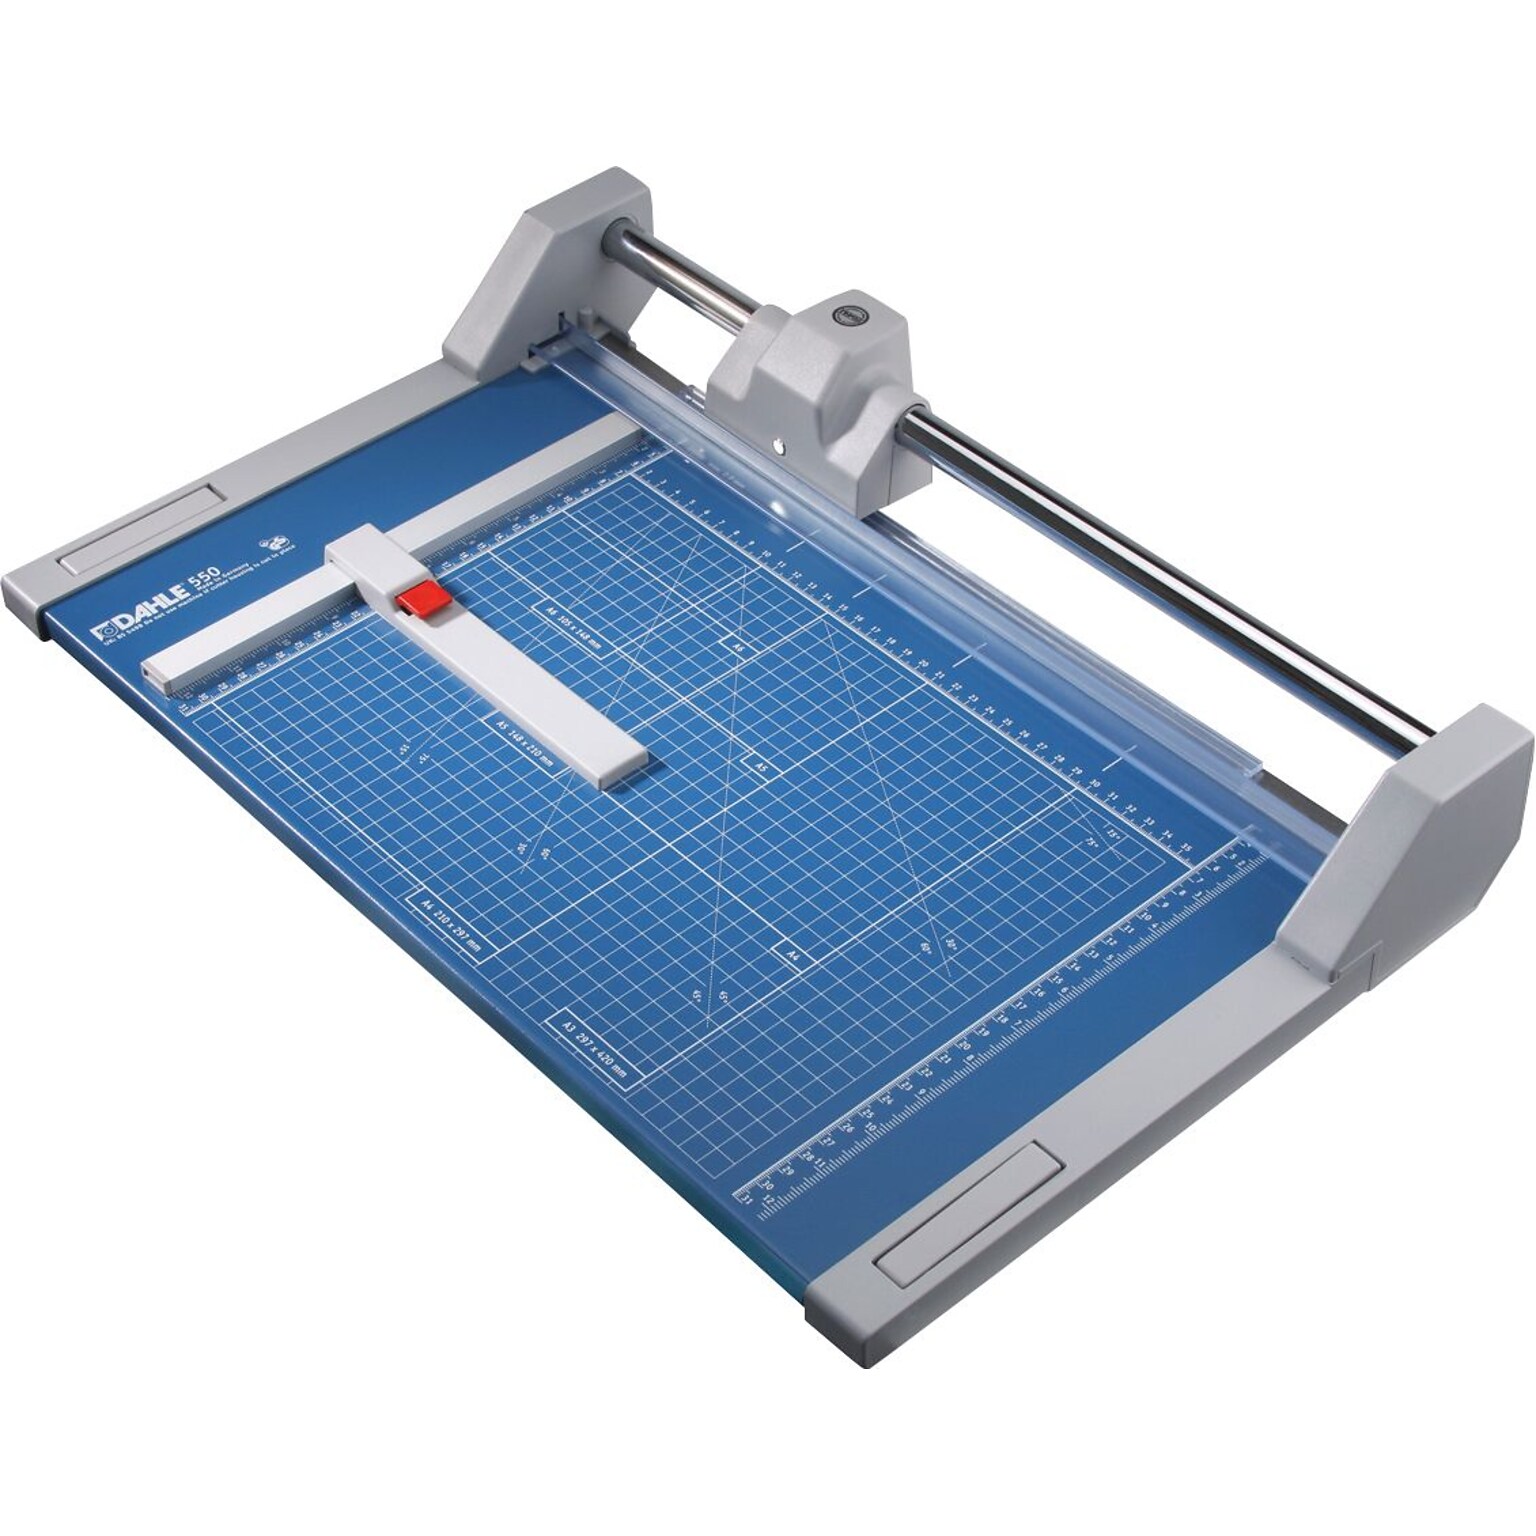 Dahle Professional 14.2 Rolling Trimmer, Blue (550)